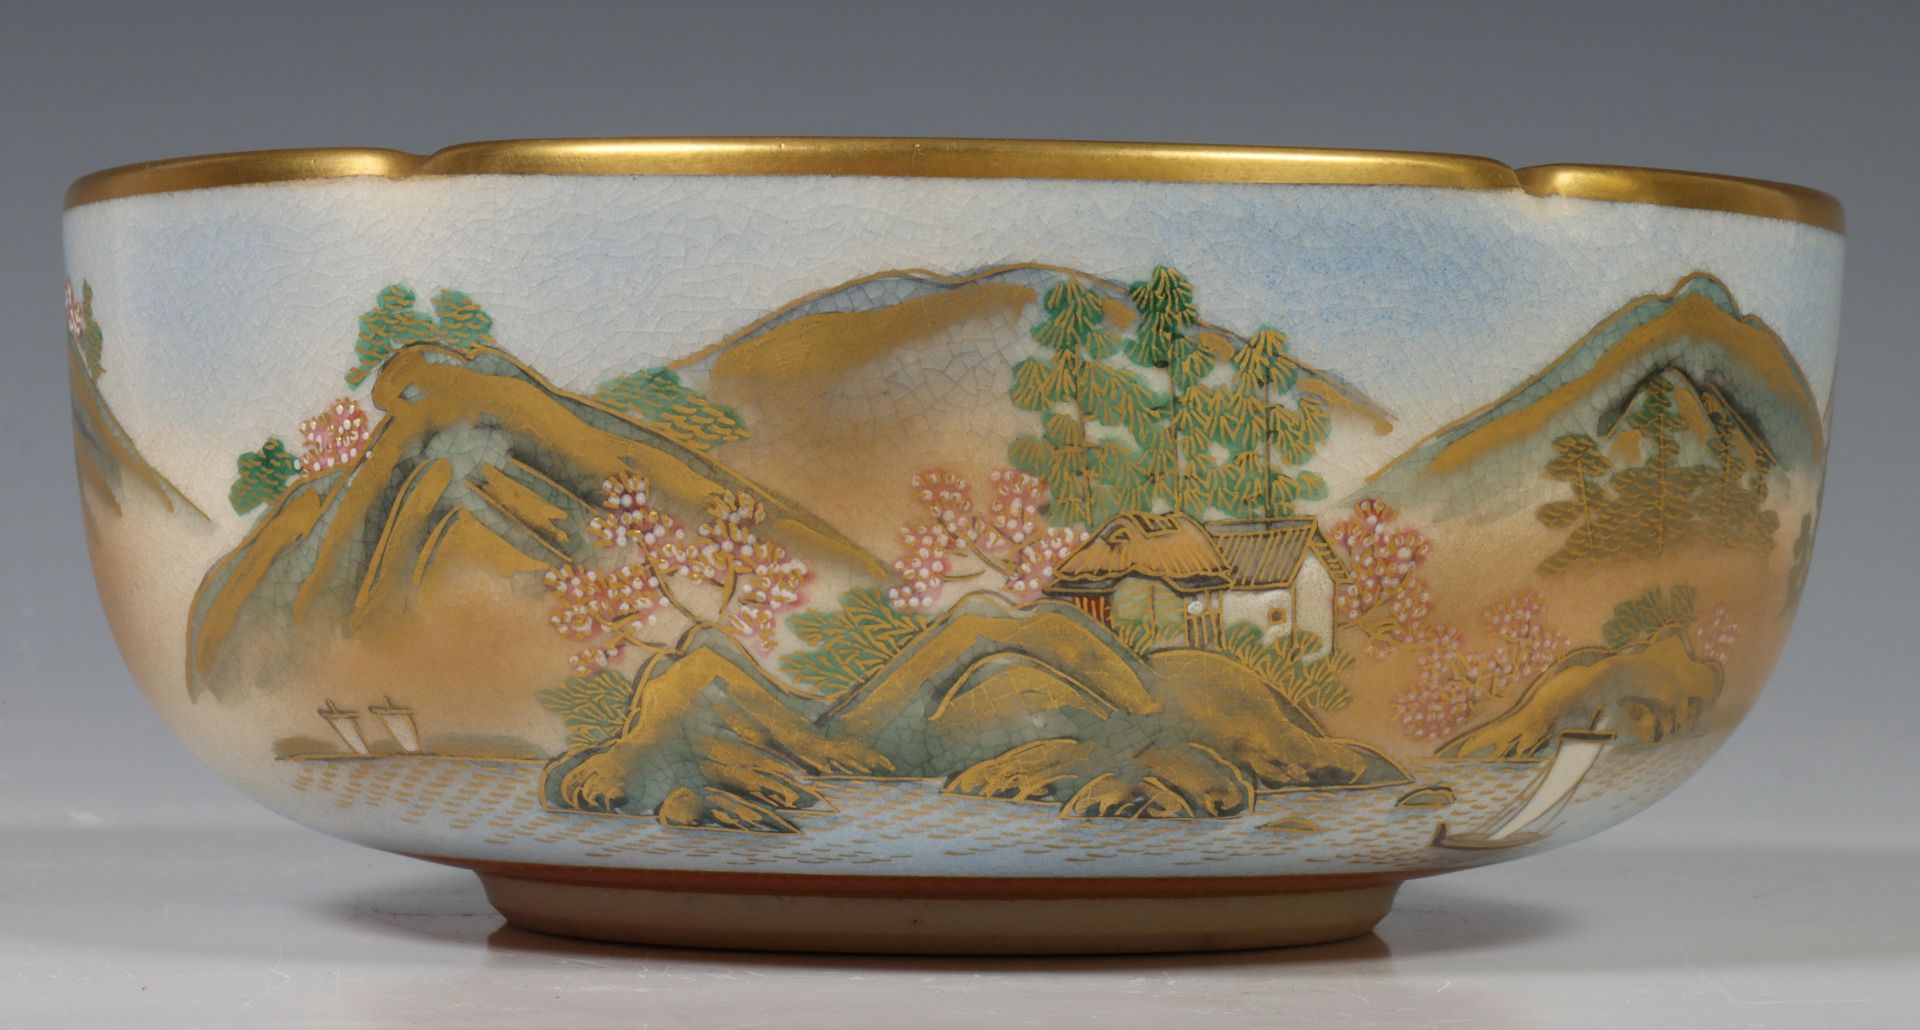 Japan, Satsuma porcelain bowl, 20th century, decorated to the interior with pavilion with mount Fuji - Image 2 of 8